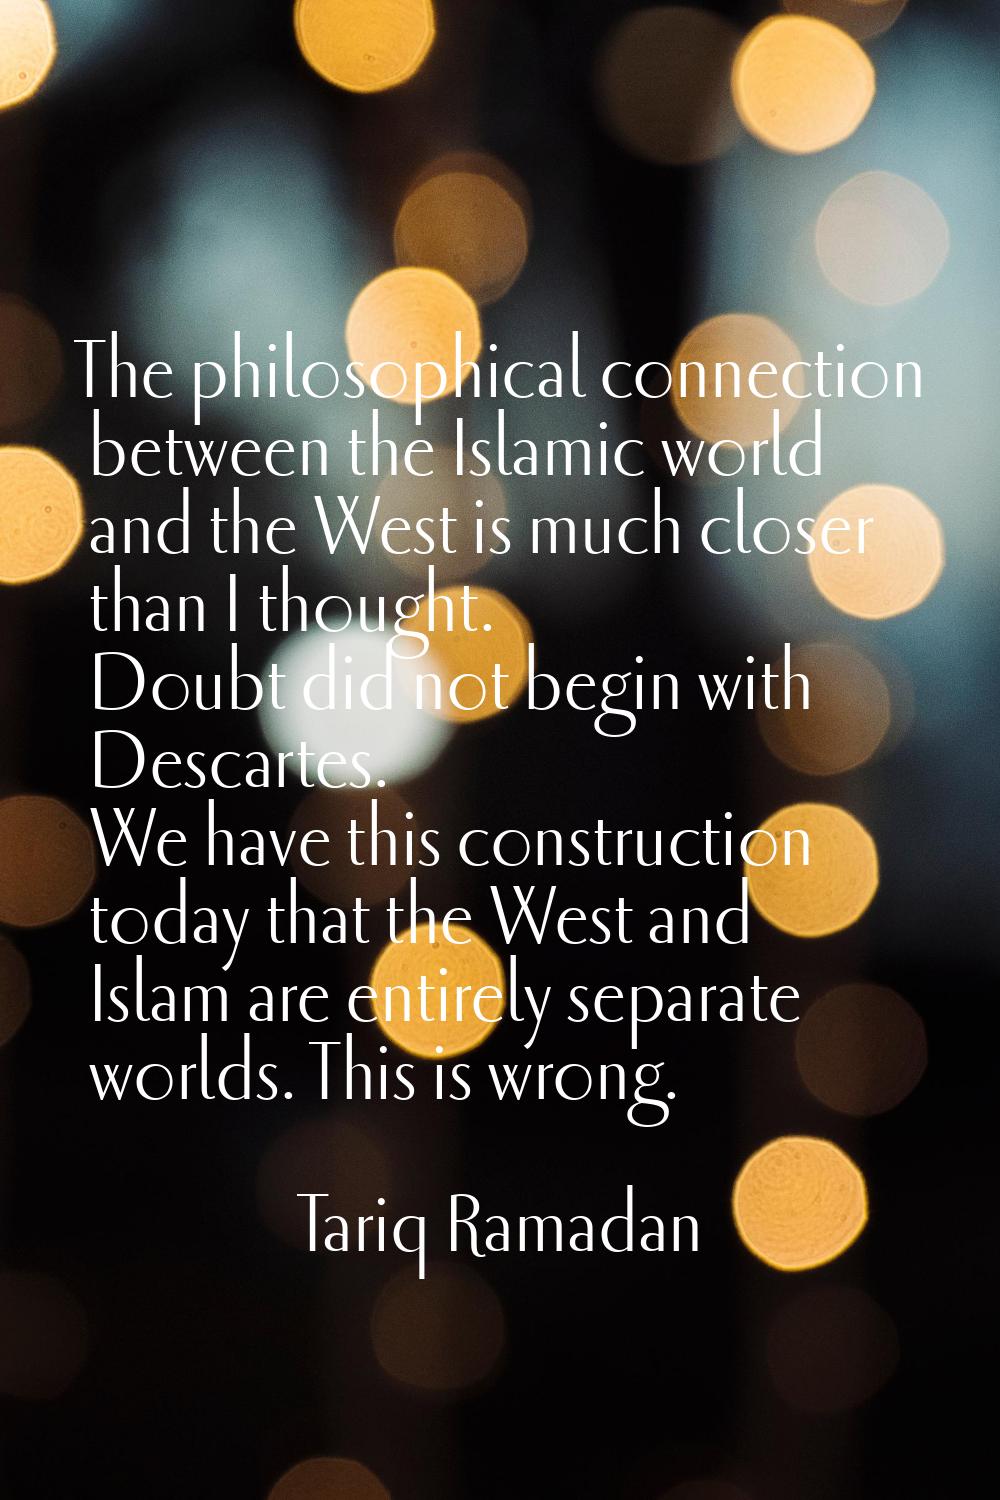 The philosophical connection between the Islamic world and the West is much closer than I thought. 